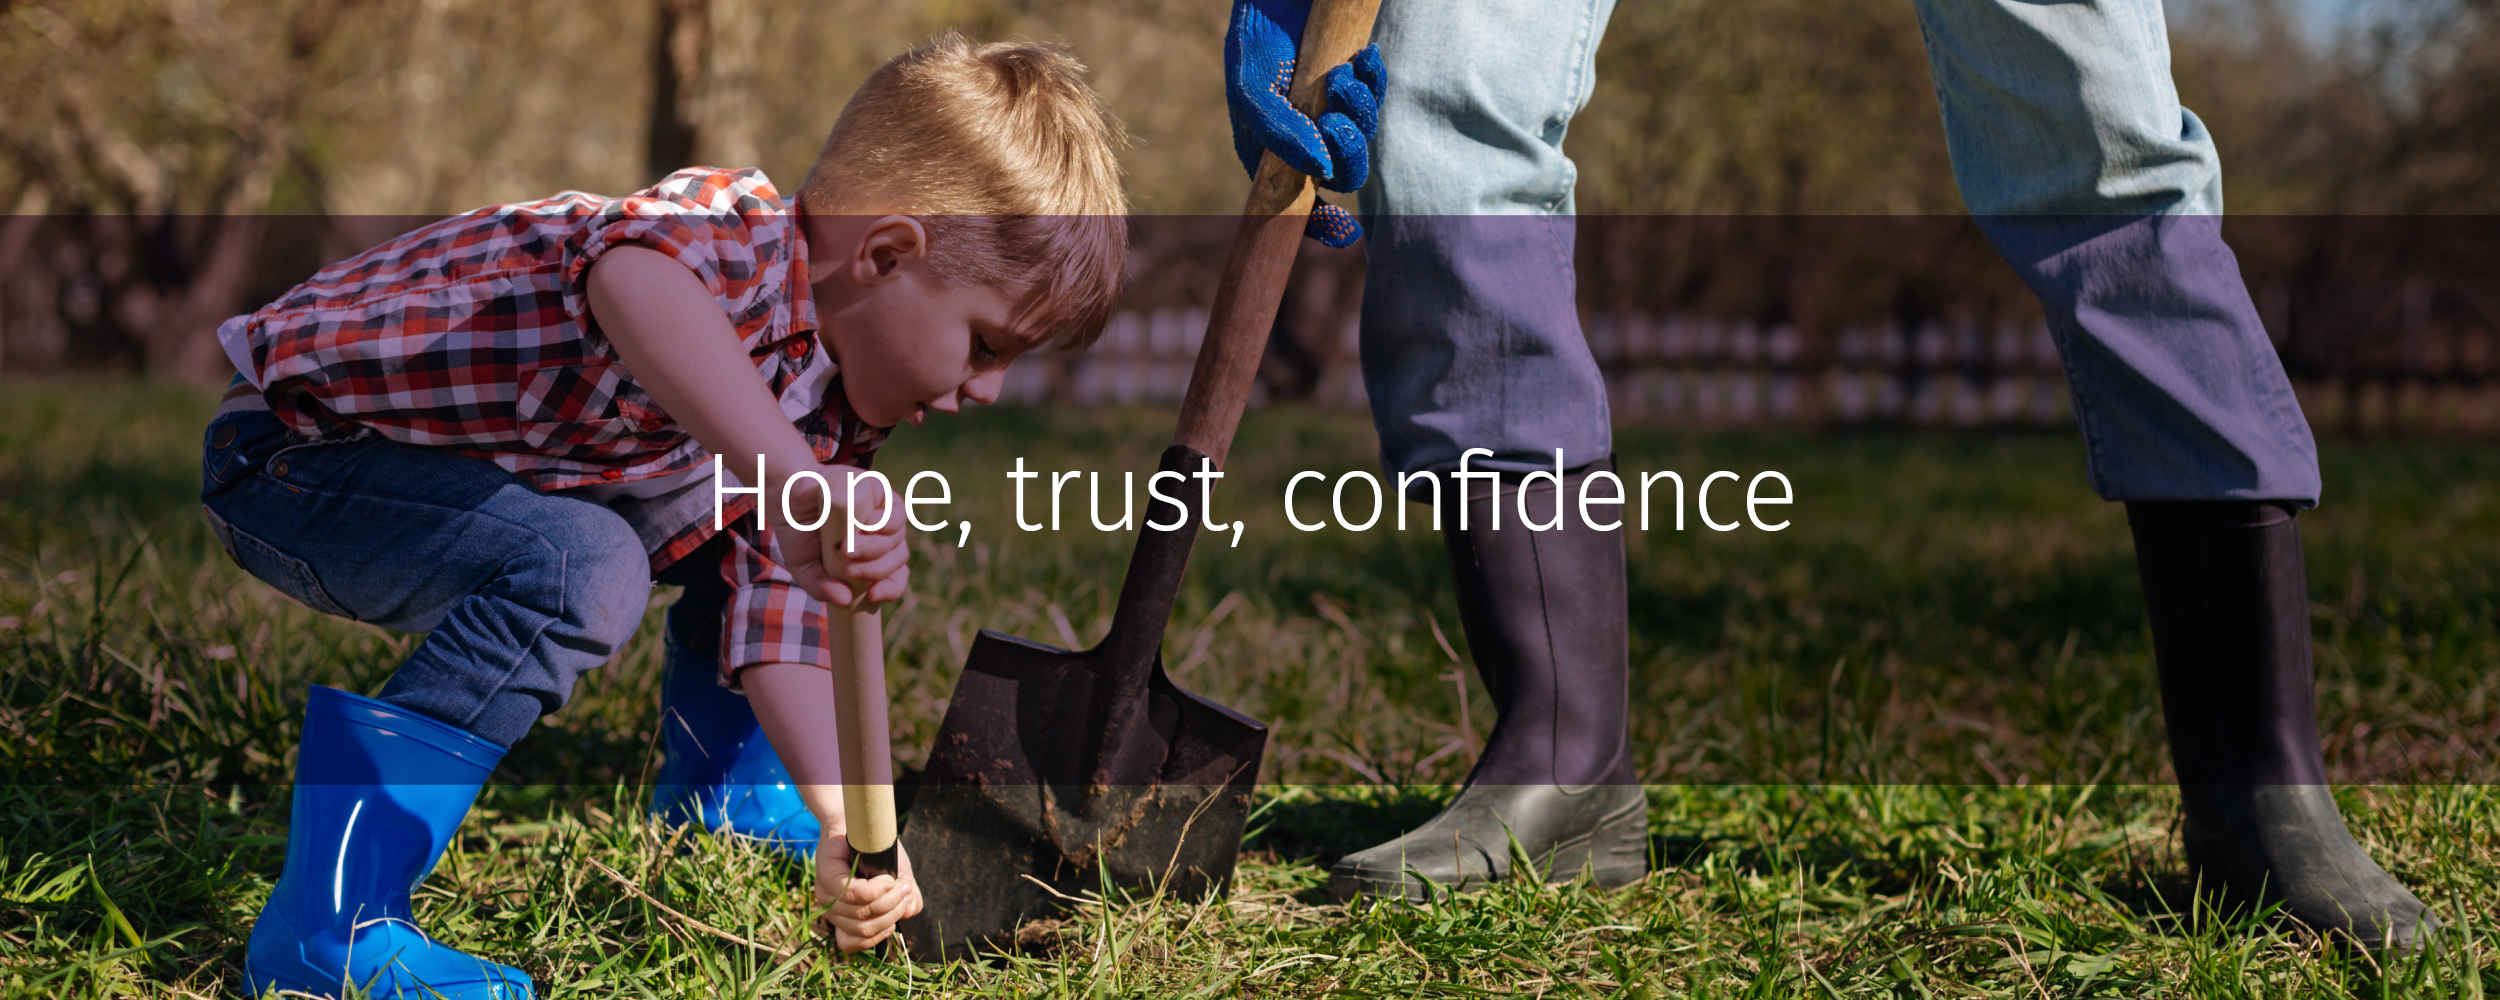 hope, trust and confidence